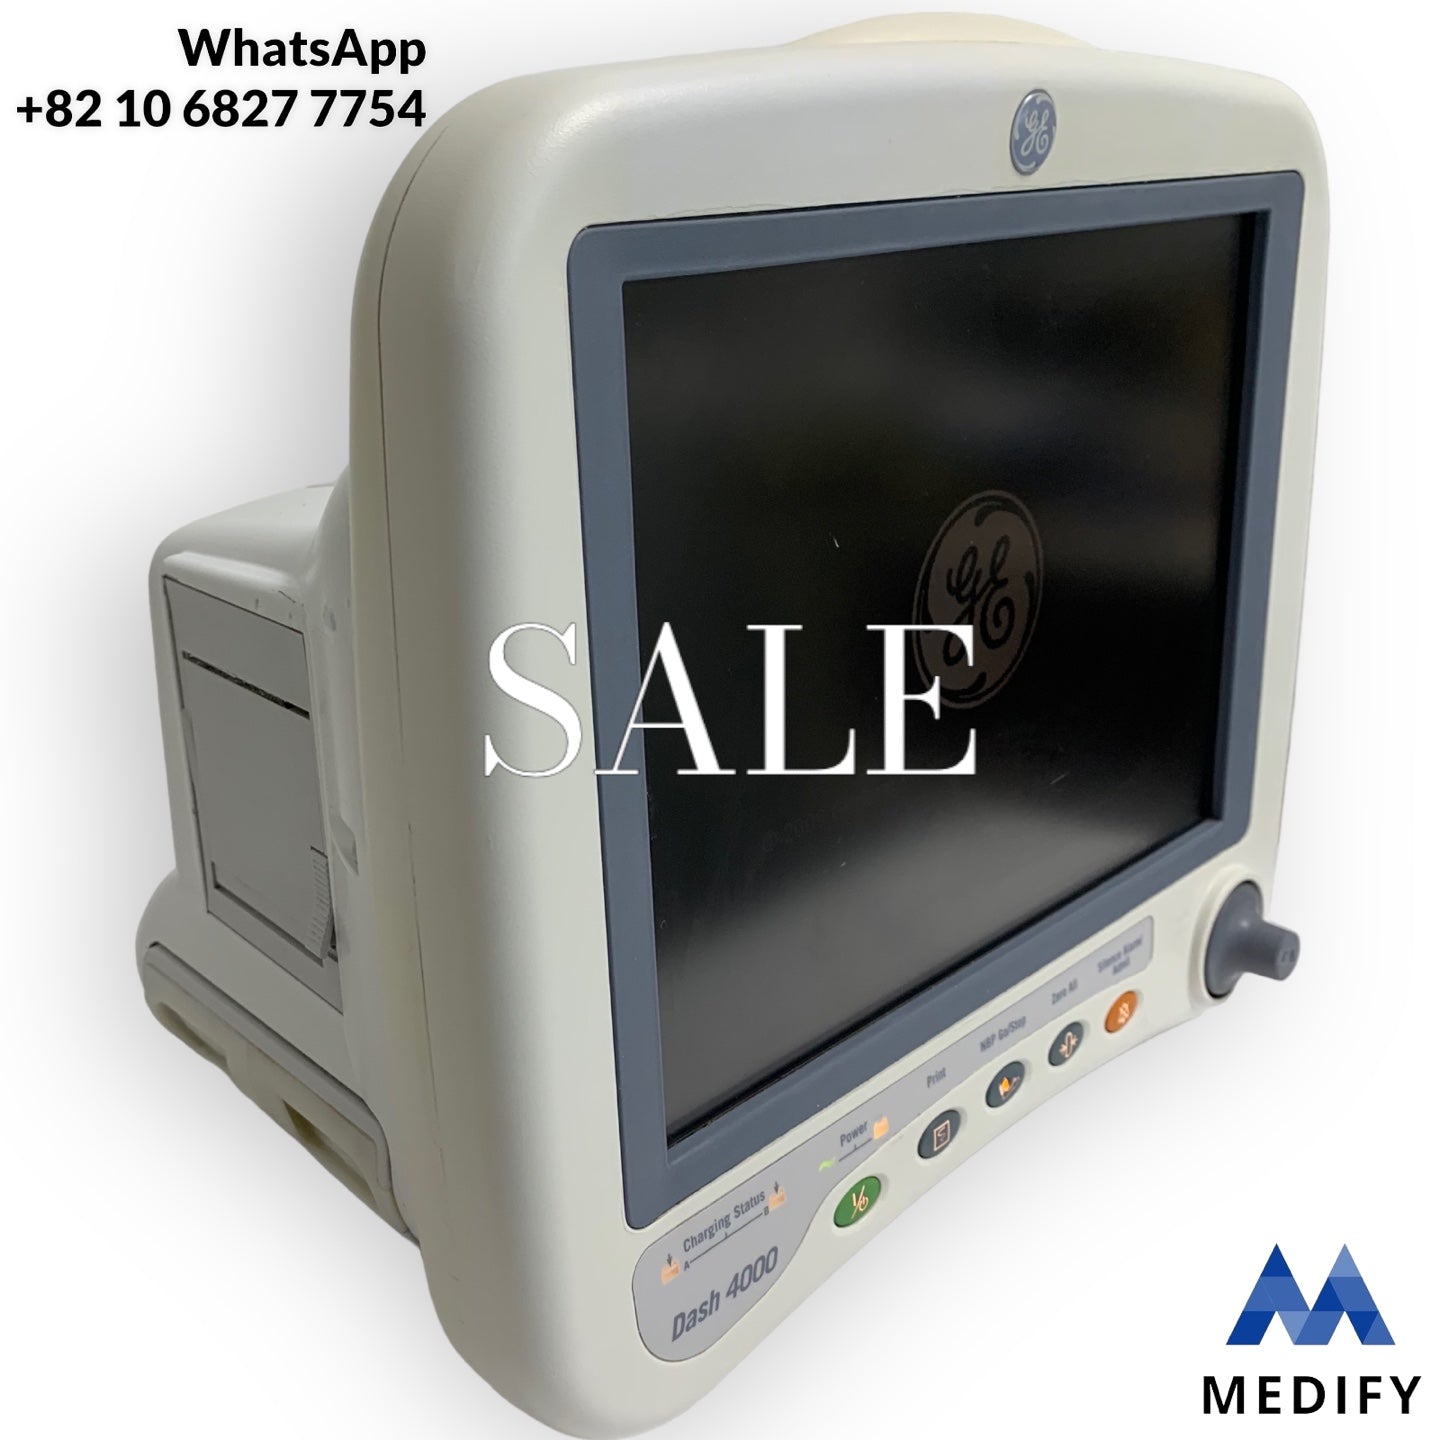 GE Dash 4000 Patient Monitor with Accessories: SP02, NiBP, Temp, Printer